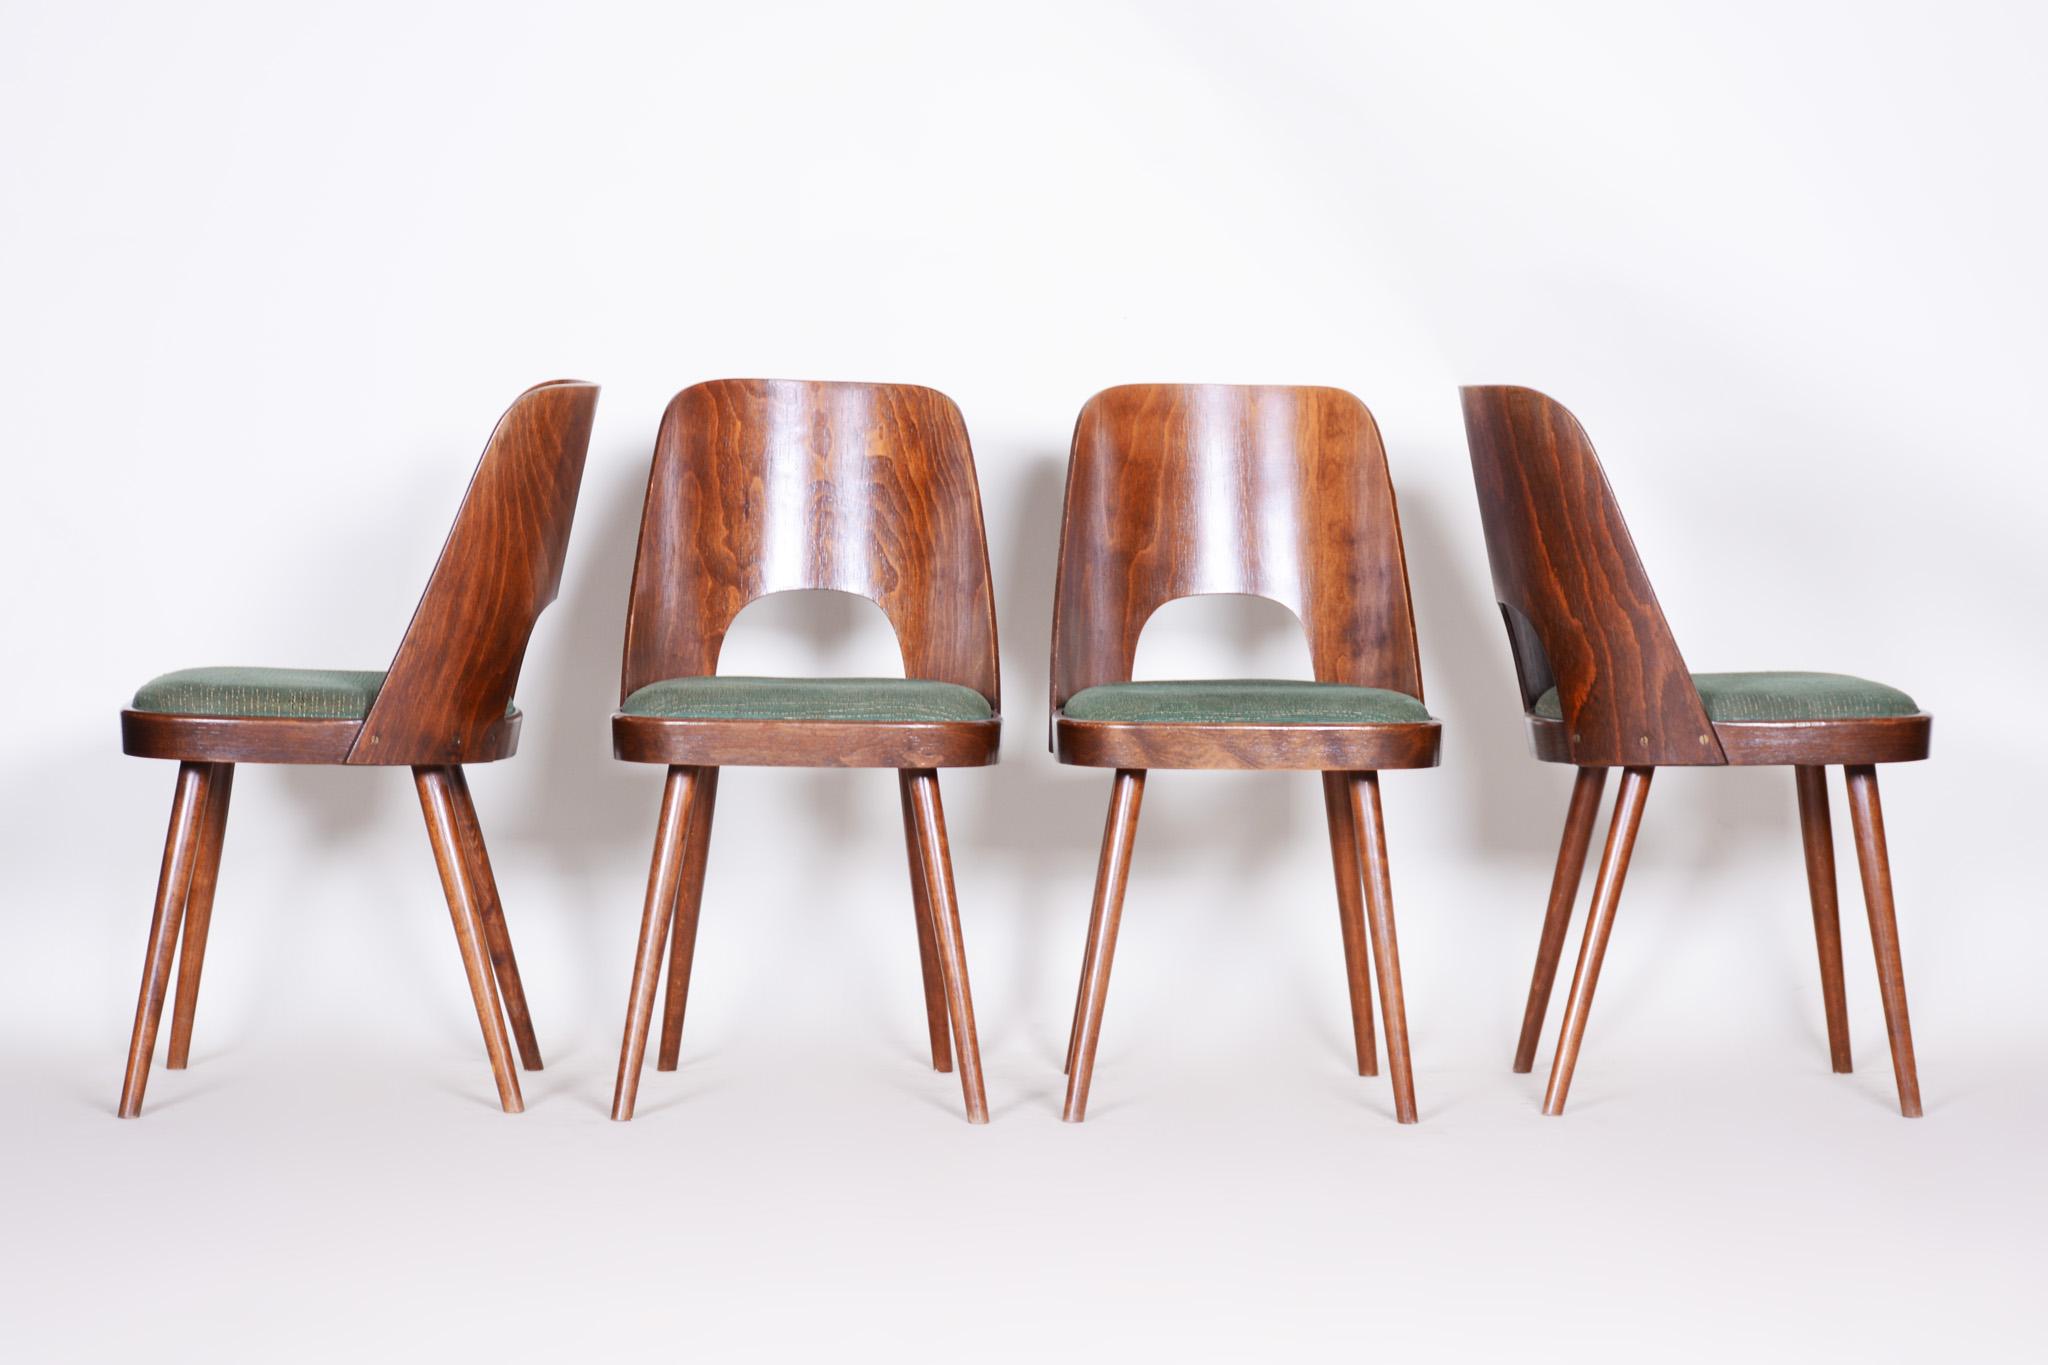 20th Century Czech Brown and Green Beech Chairs, 4 Pieces by Oswald Haerdtl - TON, 1950s